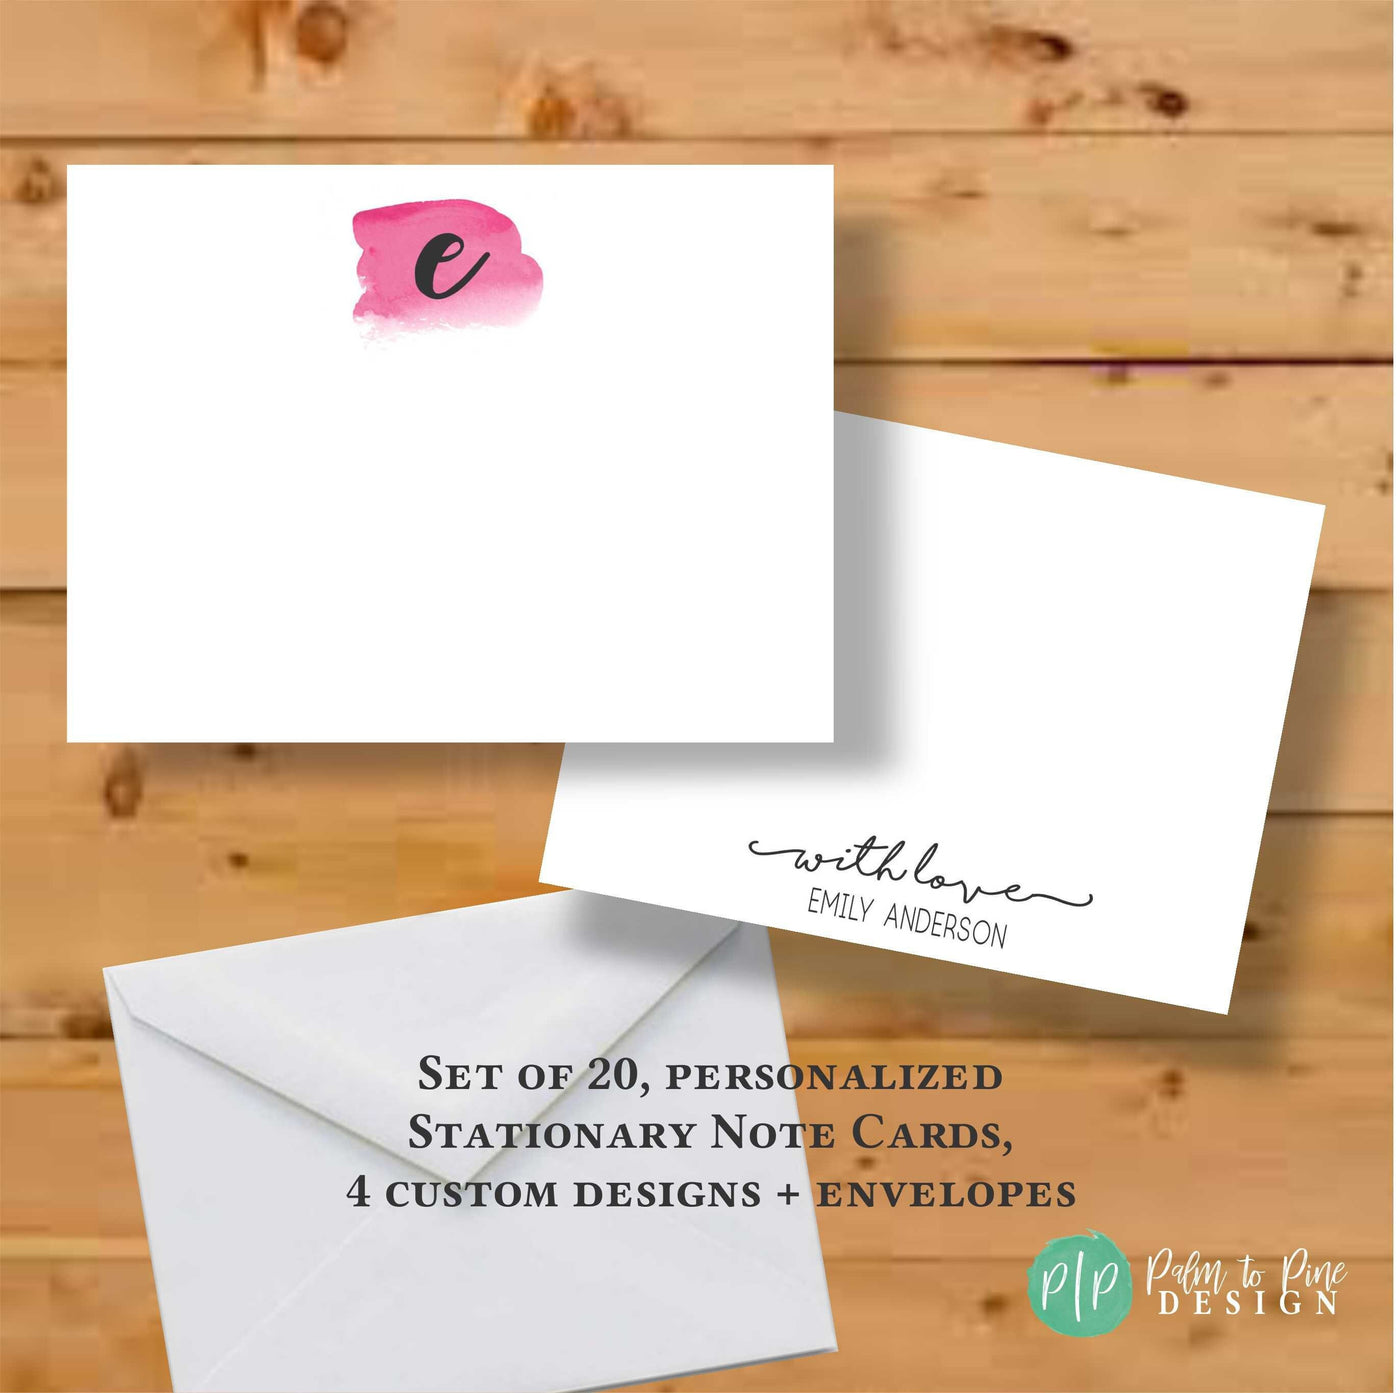 Personalized Stationary, Stationery Cards, Teacher Gift, Modern Stationery Cards, Stationary Set, Personalized Cards, Stationery Note Card